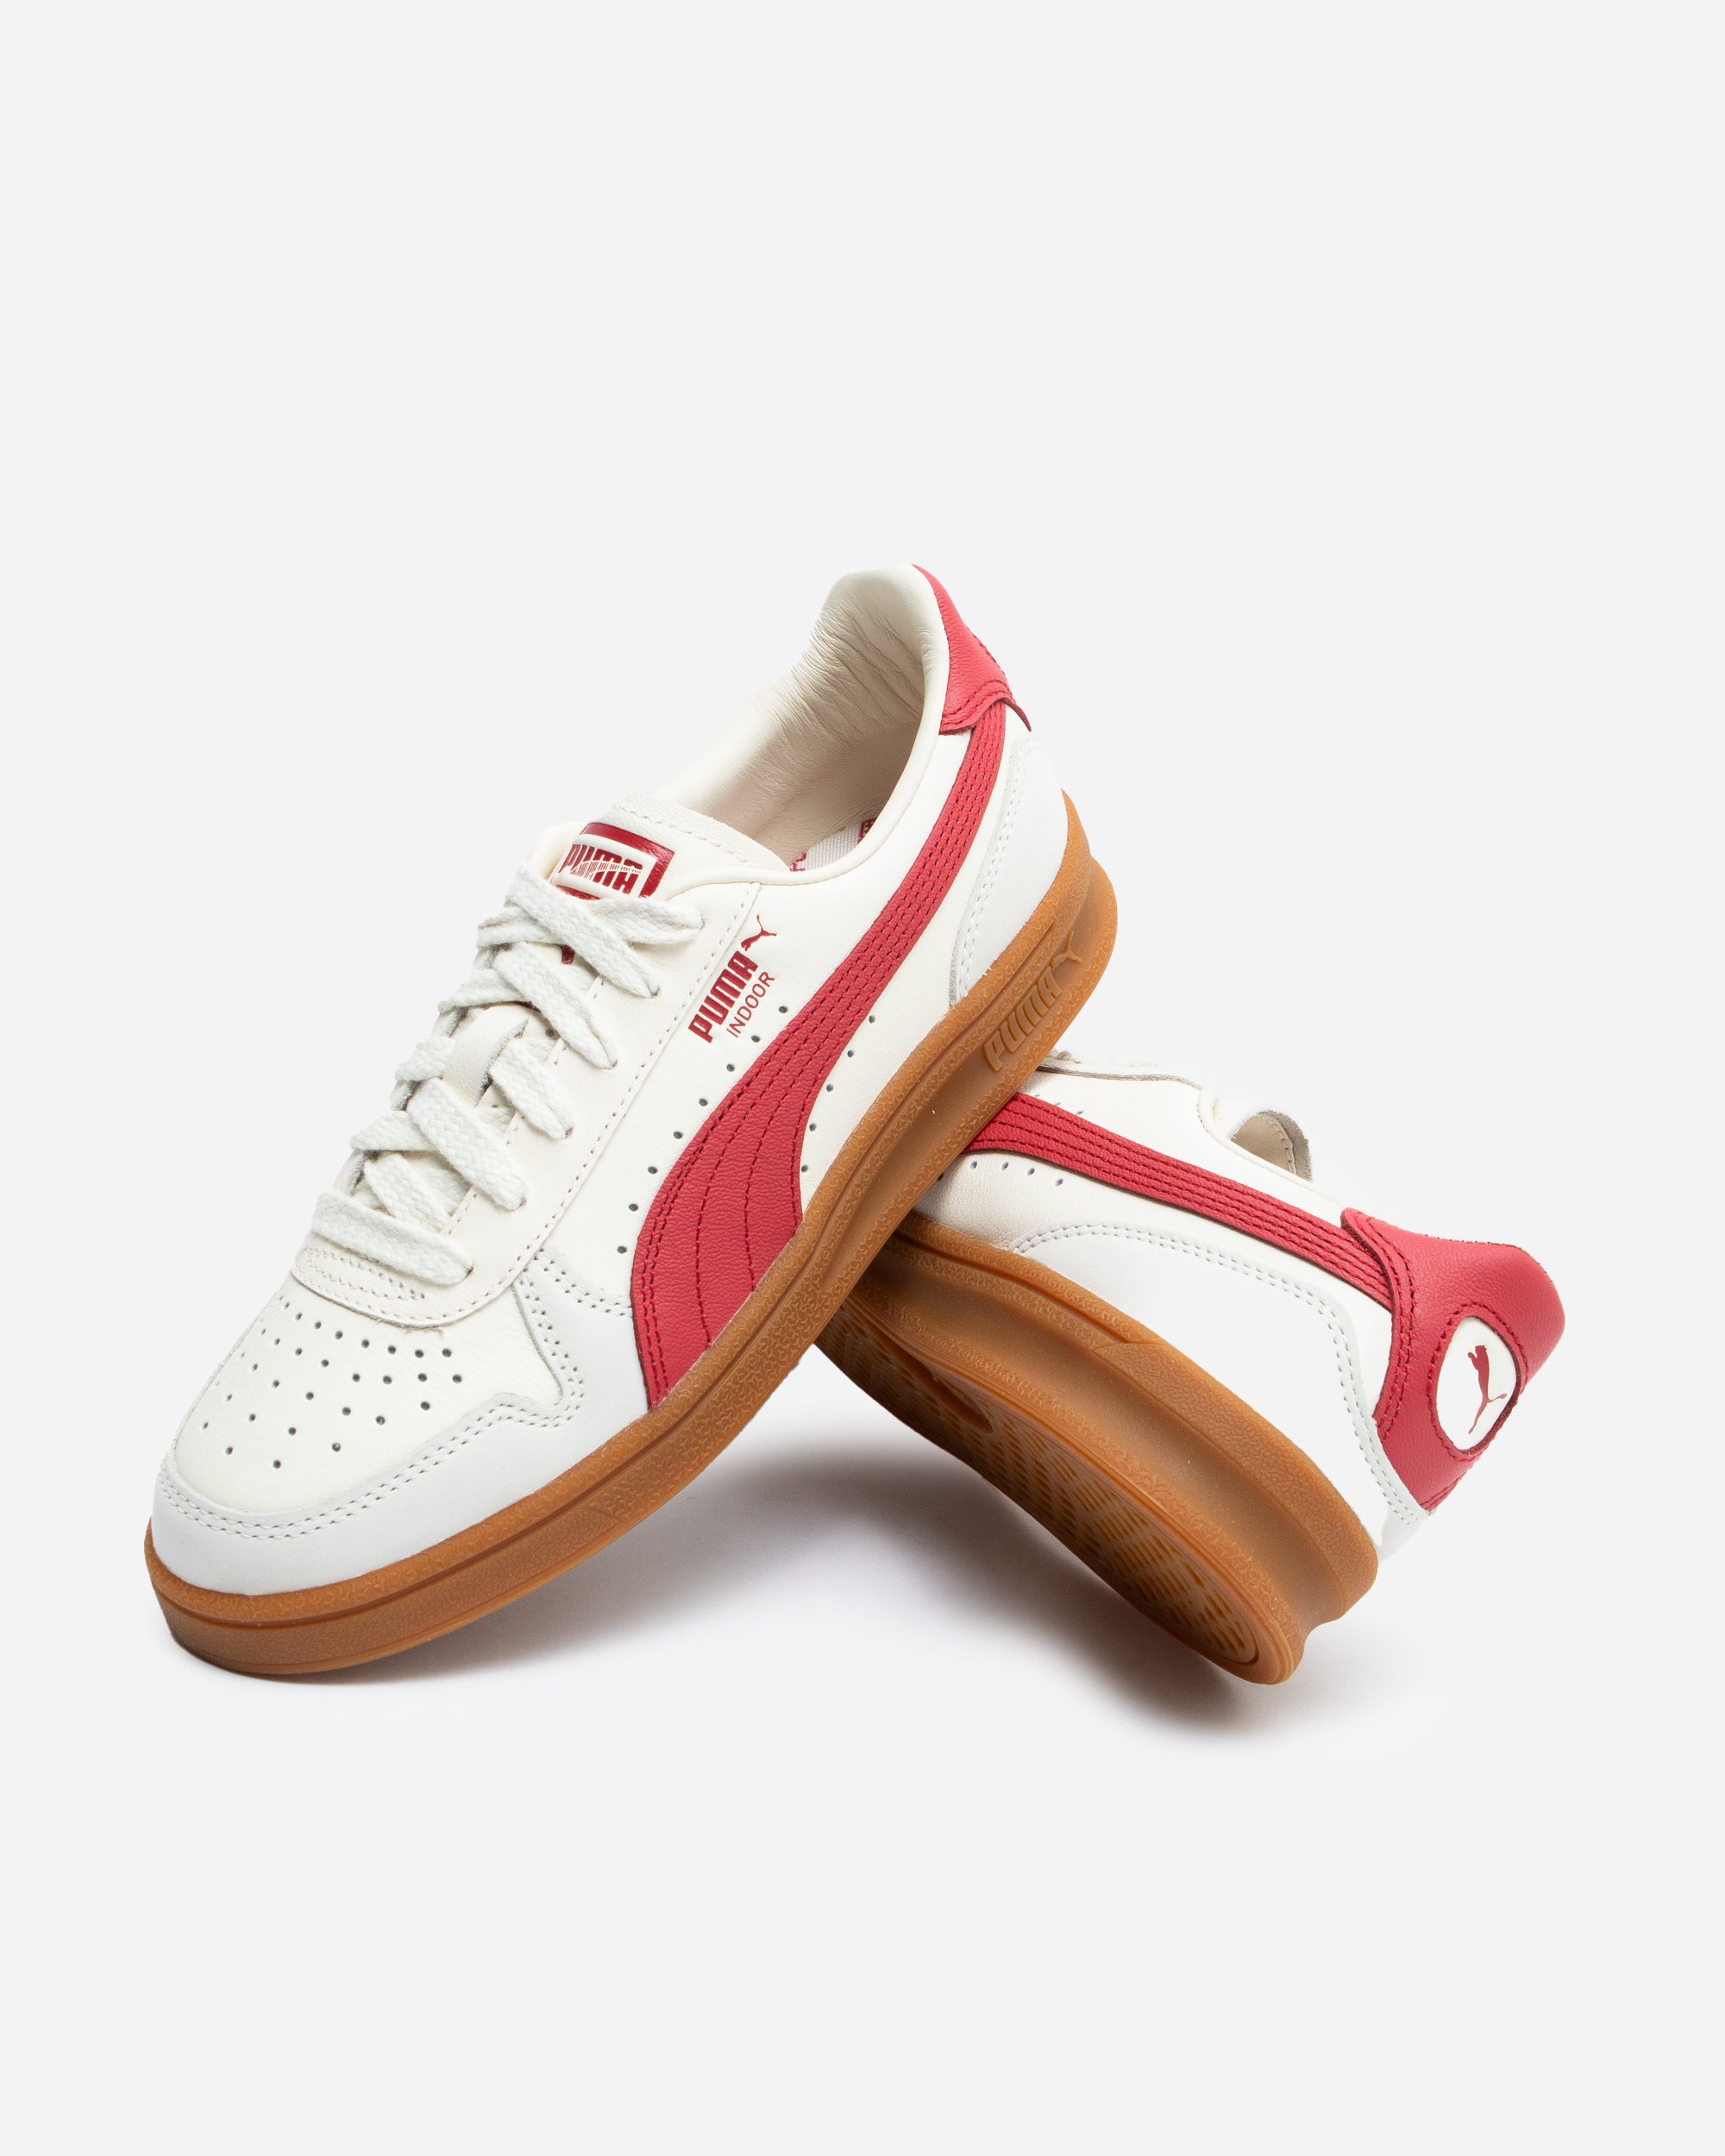 Puma Indoor OG Frosted Ivory-Club Red 395363-001